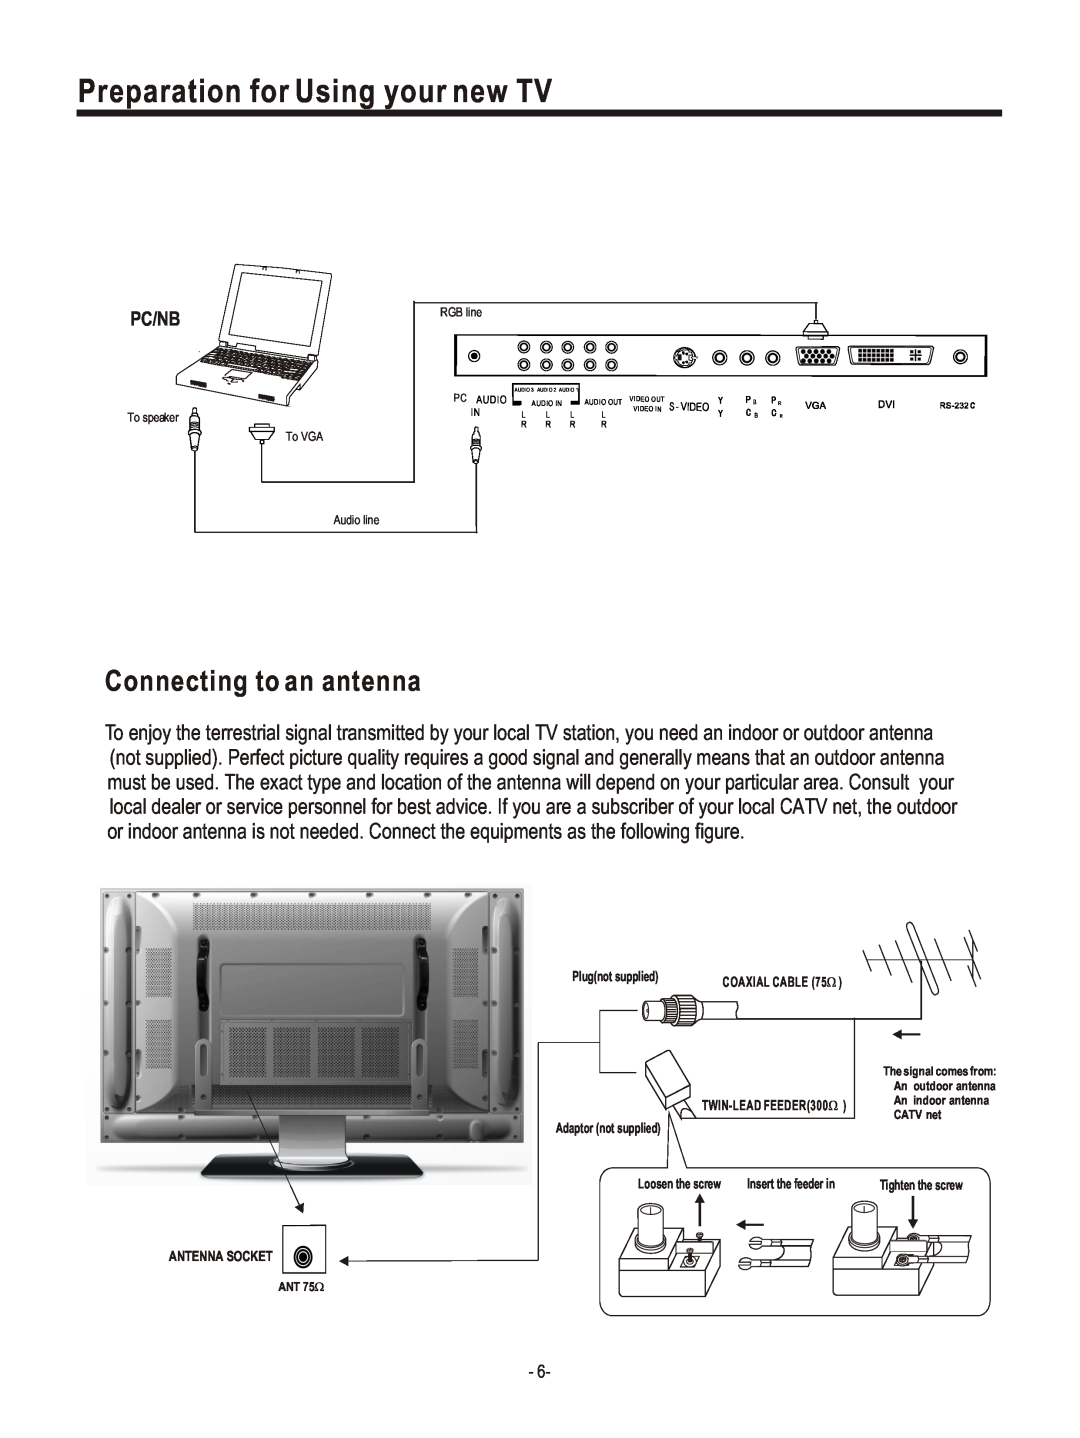 Hisense Group PDP4220EU user manual Connecting to an antenna, Preparation for Using your new TV, Pc/Nb 